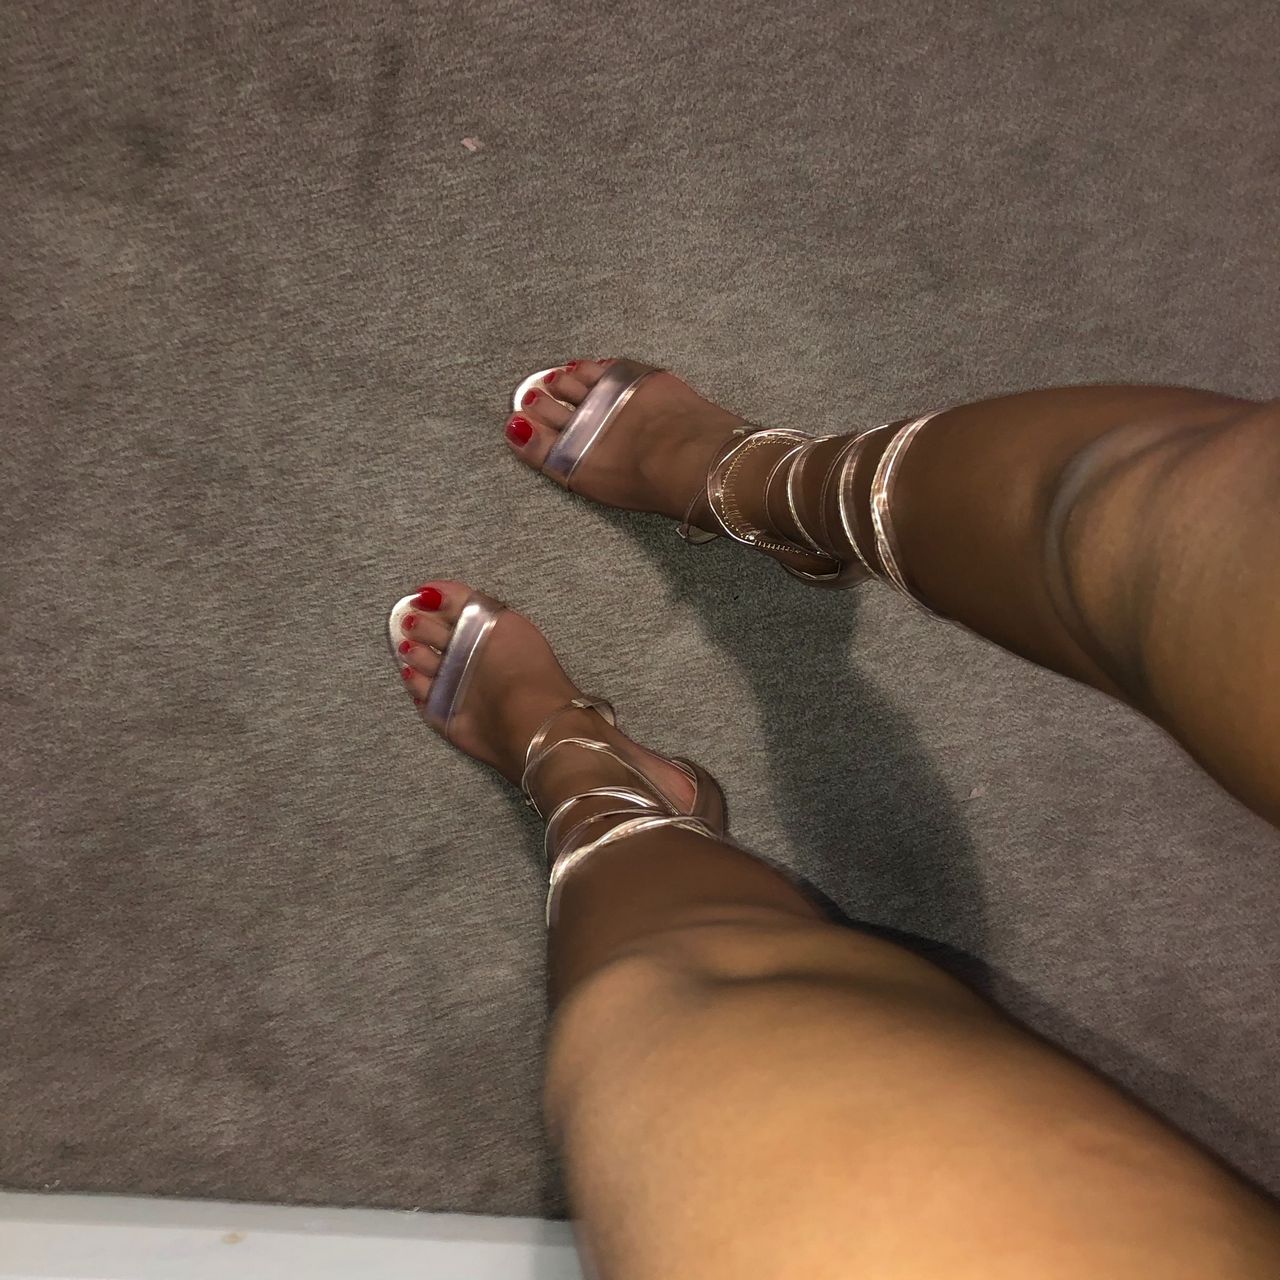 Arya Sf Gold Heels And Red Toes